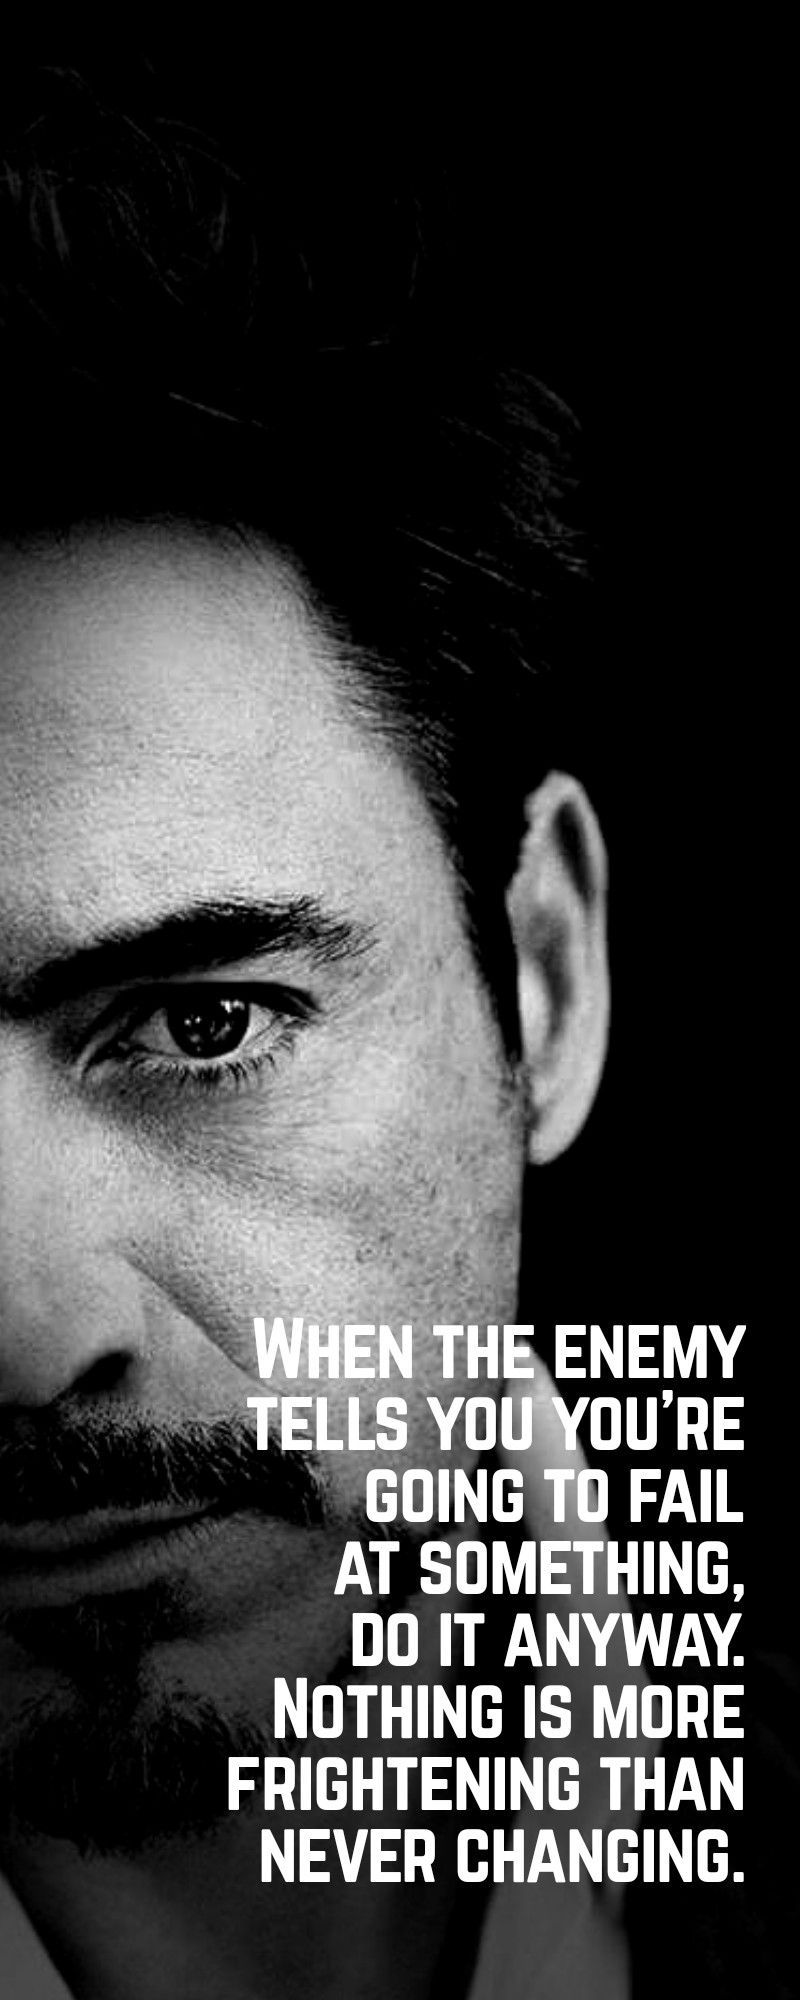 Tony Stark quotes.iron man quotes. Quotes about life. Life quotes. Quotes about enemy. Joker quotes. Awesome quot. Iron man quotes, Stark quote, Tony stark quotes